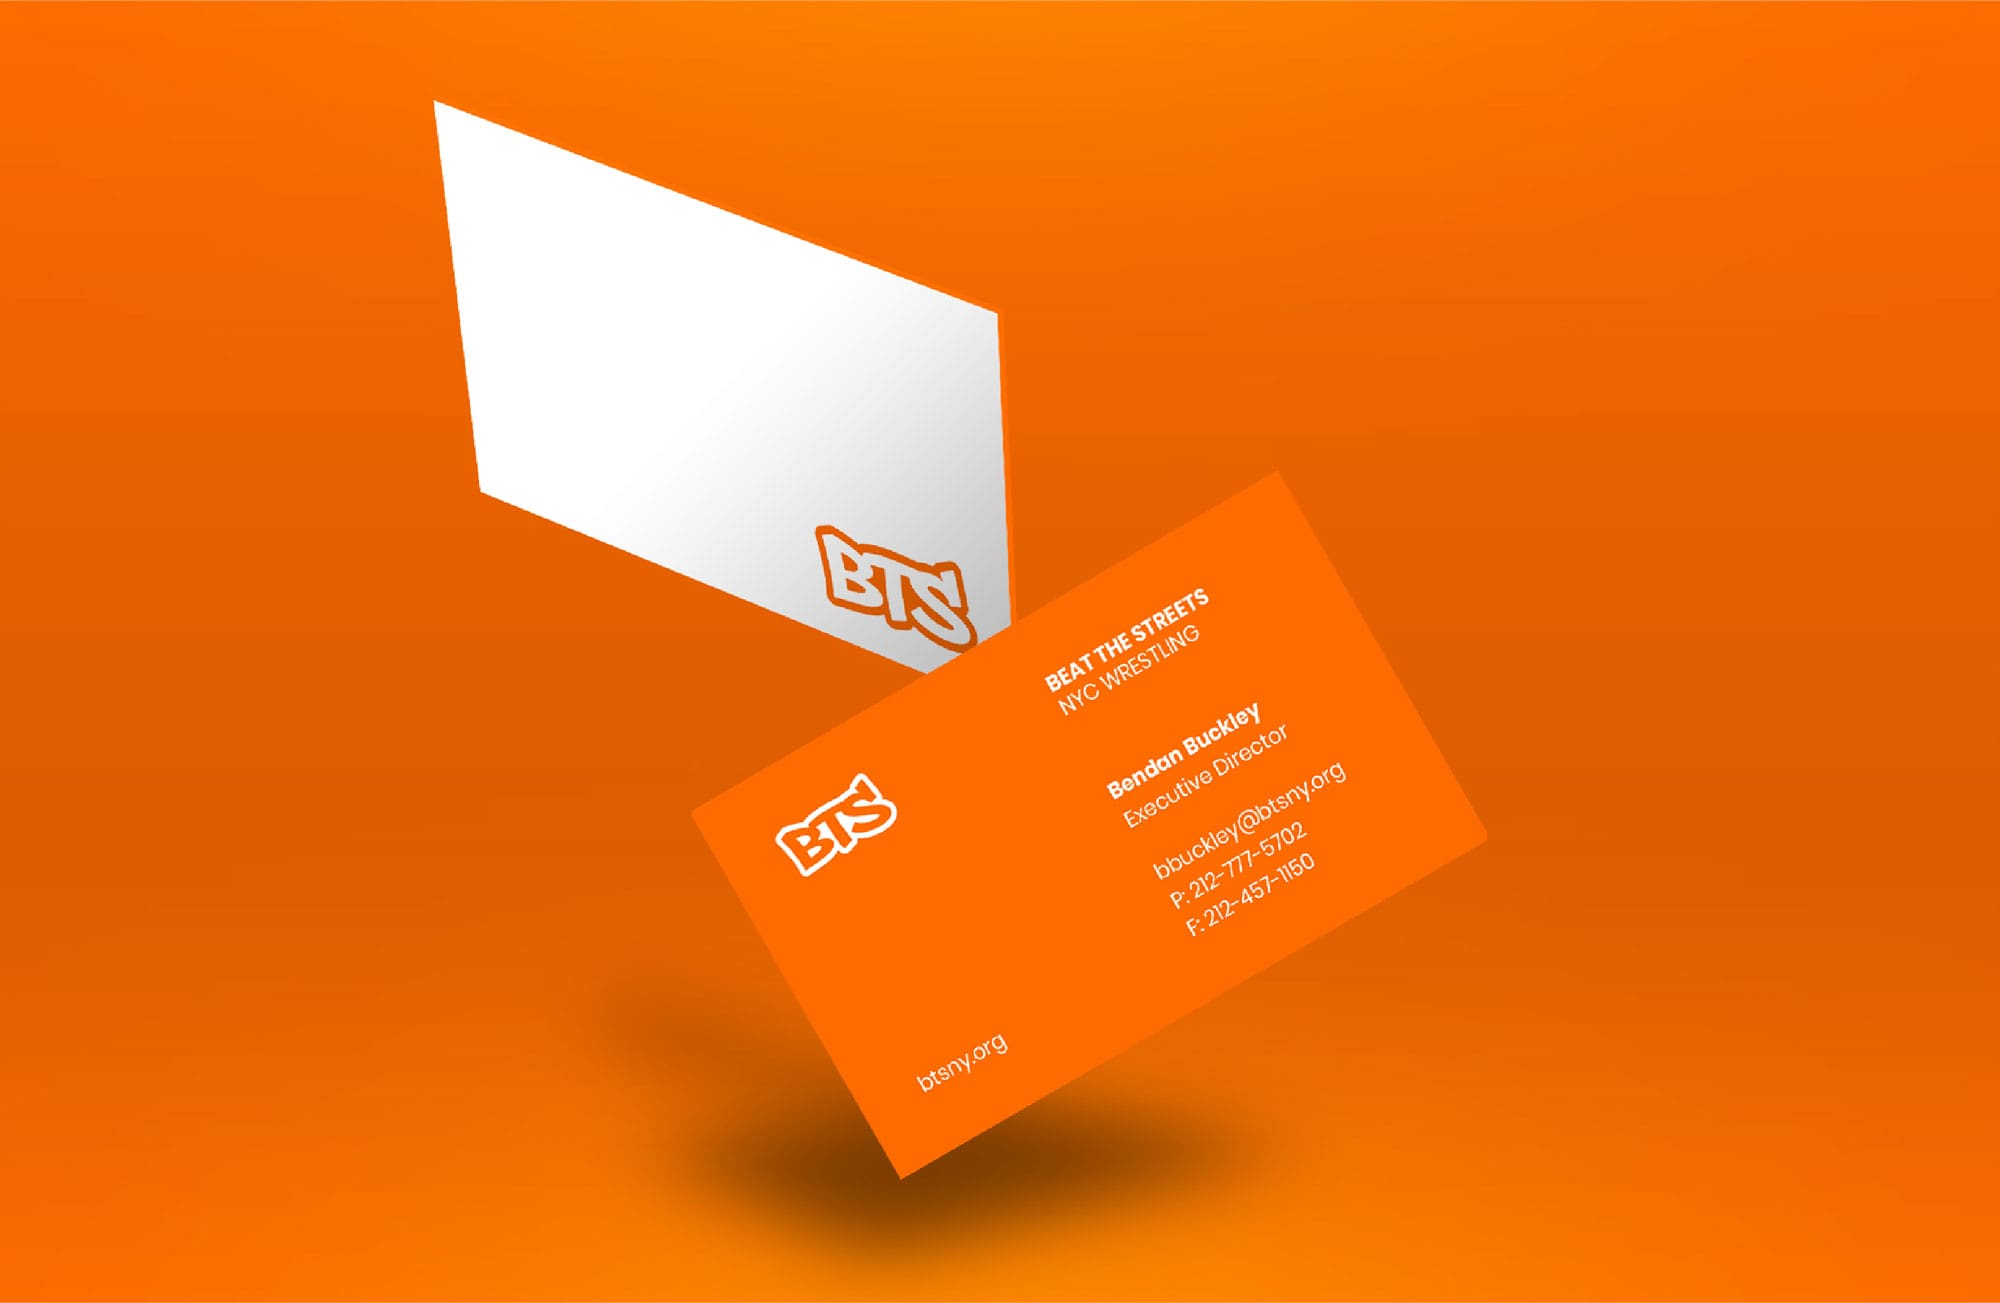 Beat the streets logos and color schemes on business cards